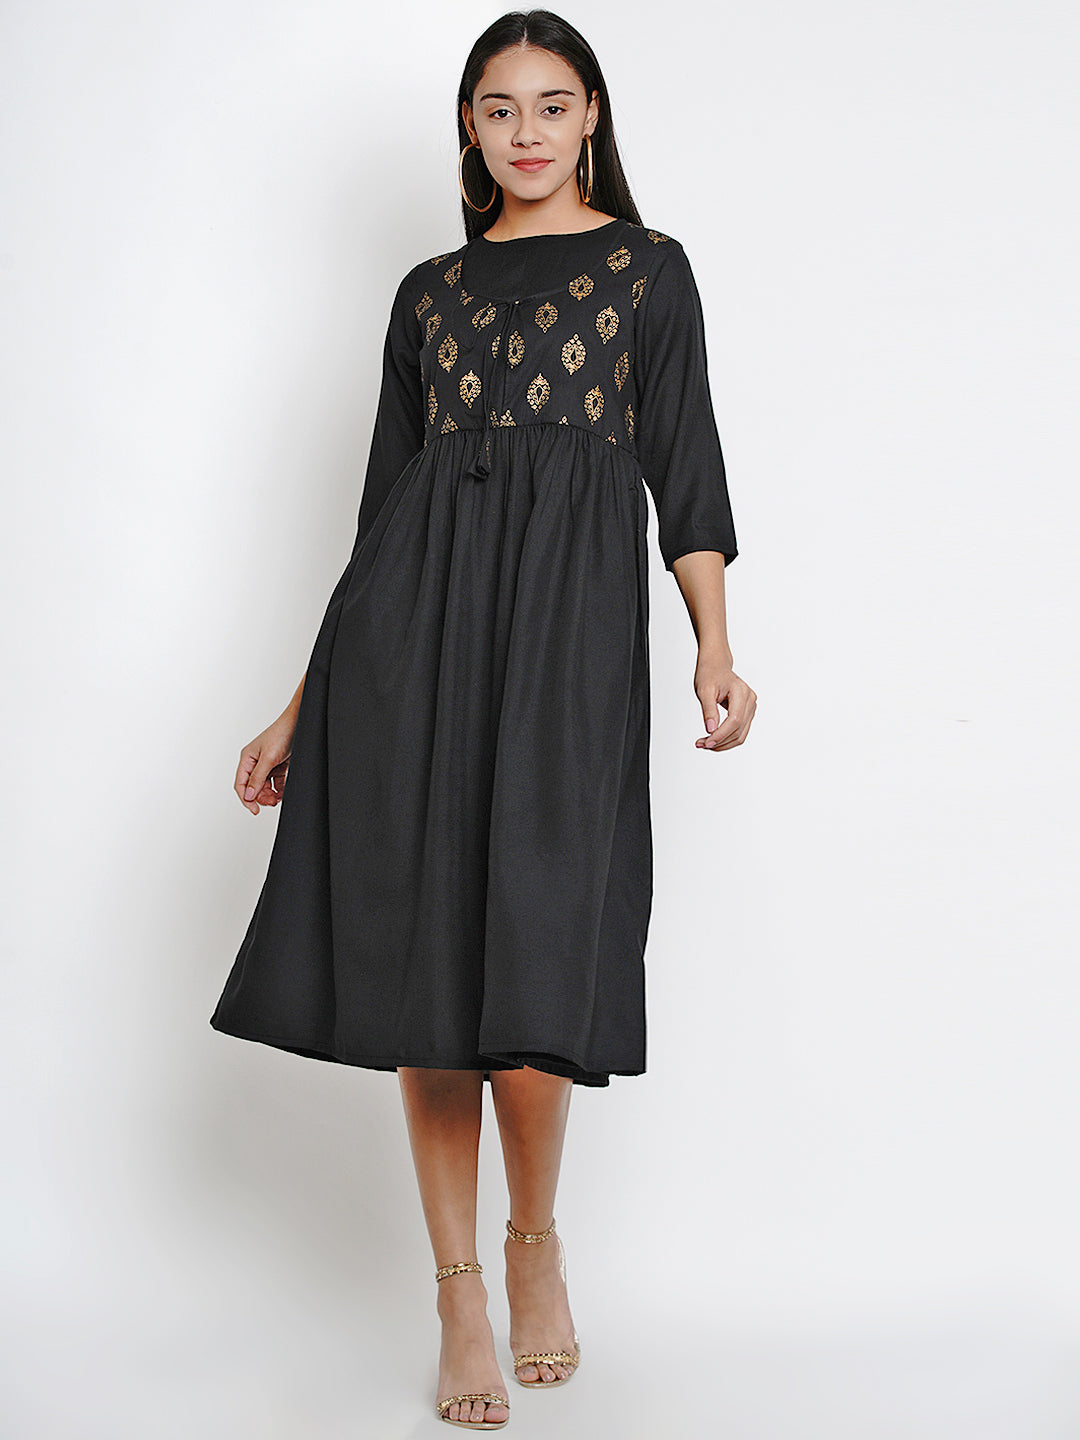 Women's Black Printed A-Line Dress - Bhama Couture